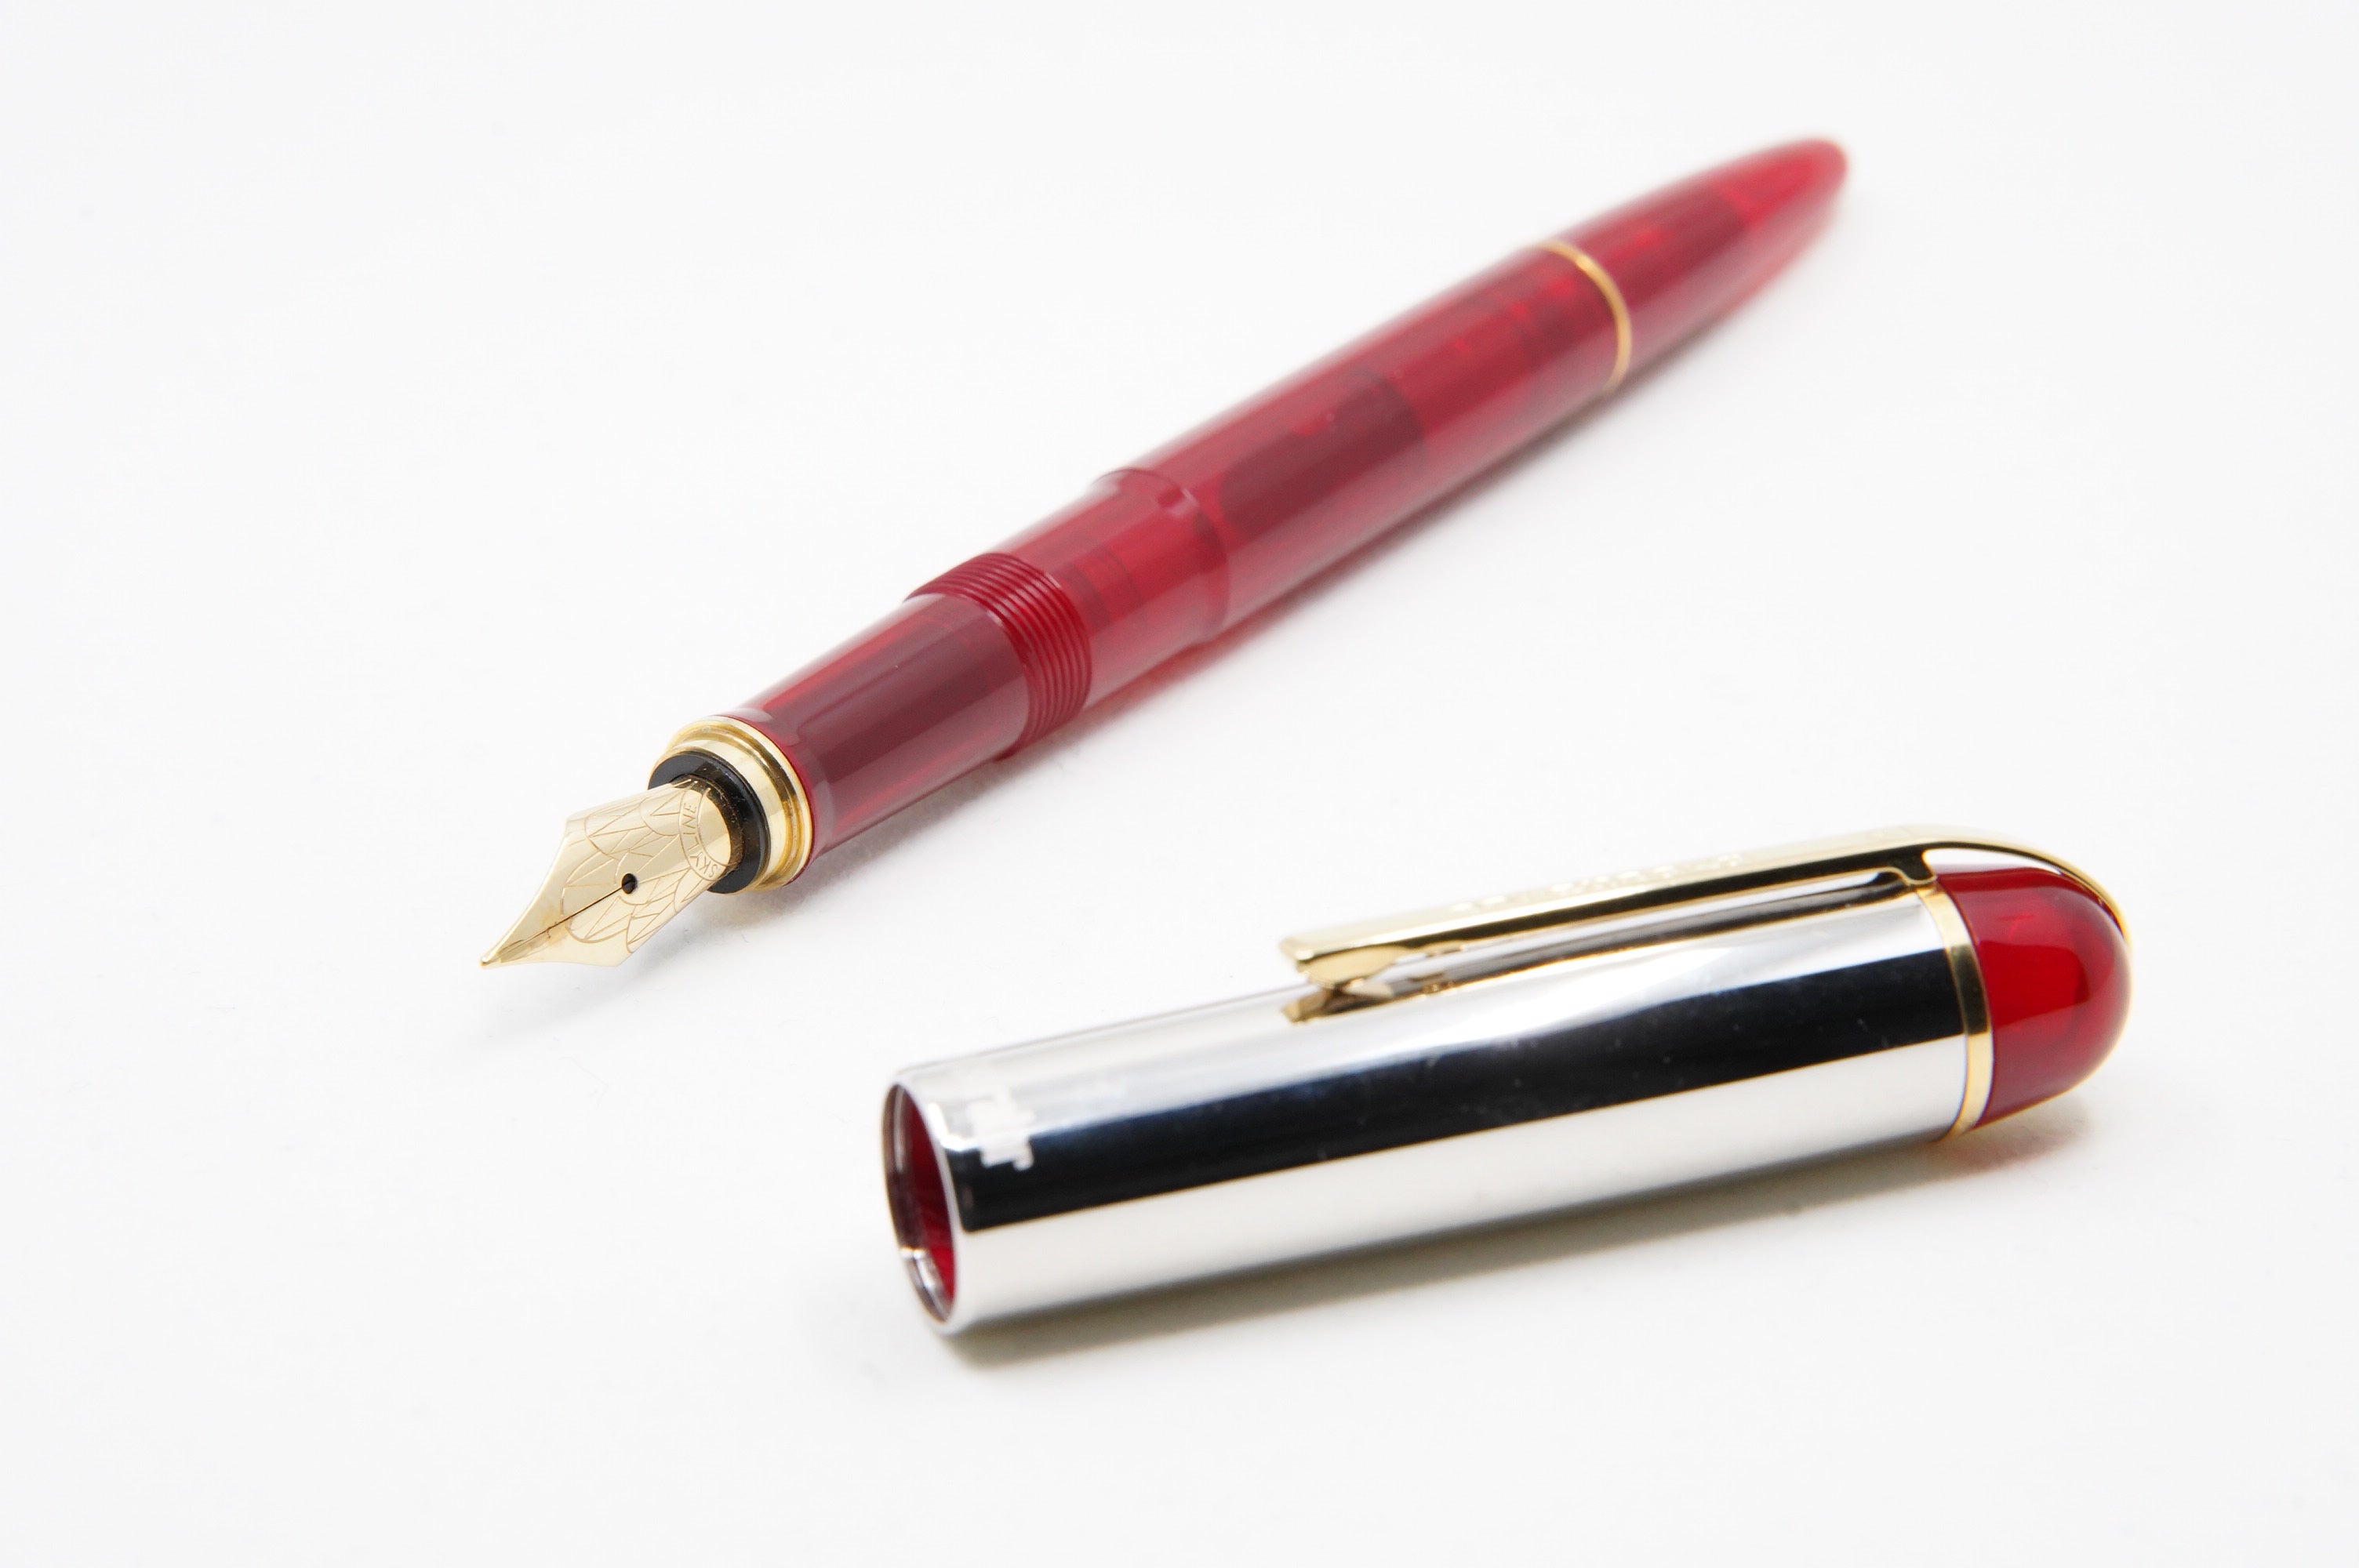 Wahl Eversharp Skyline FP Red Demo - The iconic SKYLINE created by Henry Dreyfus in 1939